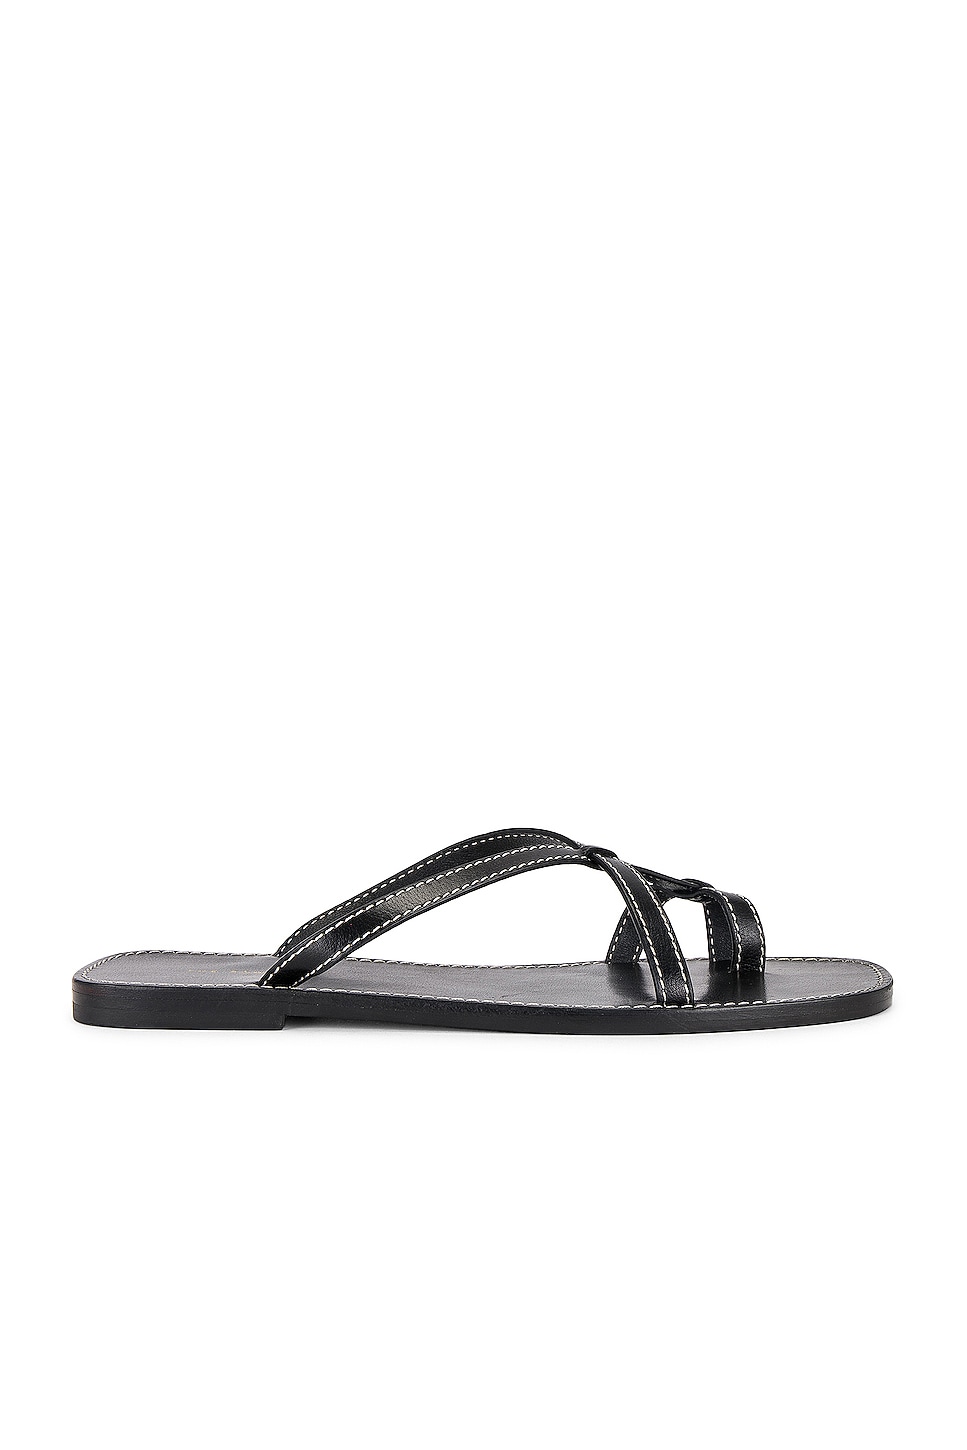 Image 1 of The Row Link Sandal in INDIGO